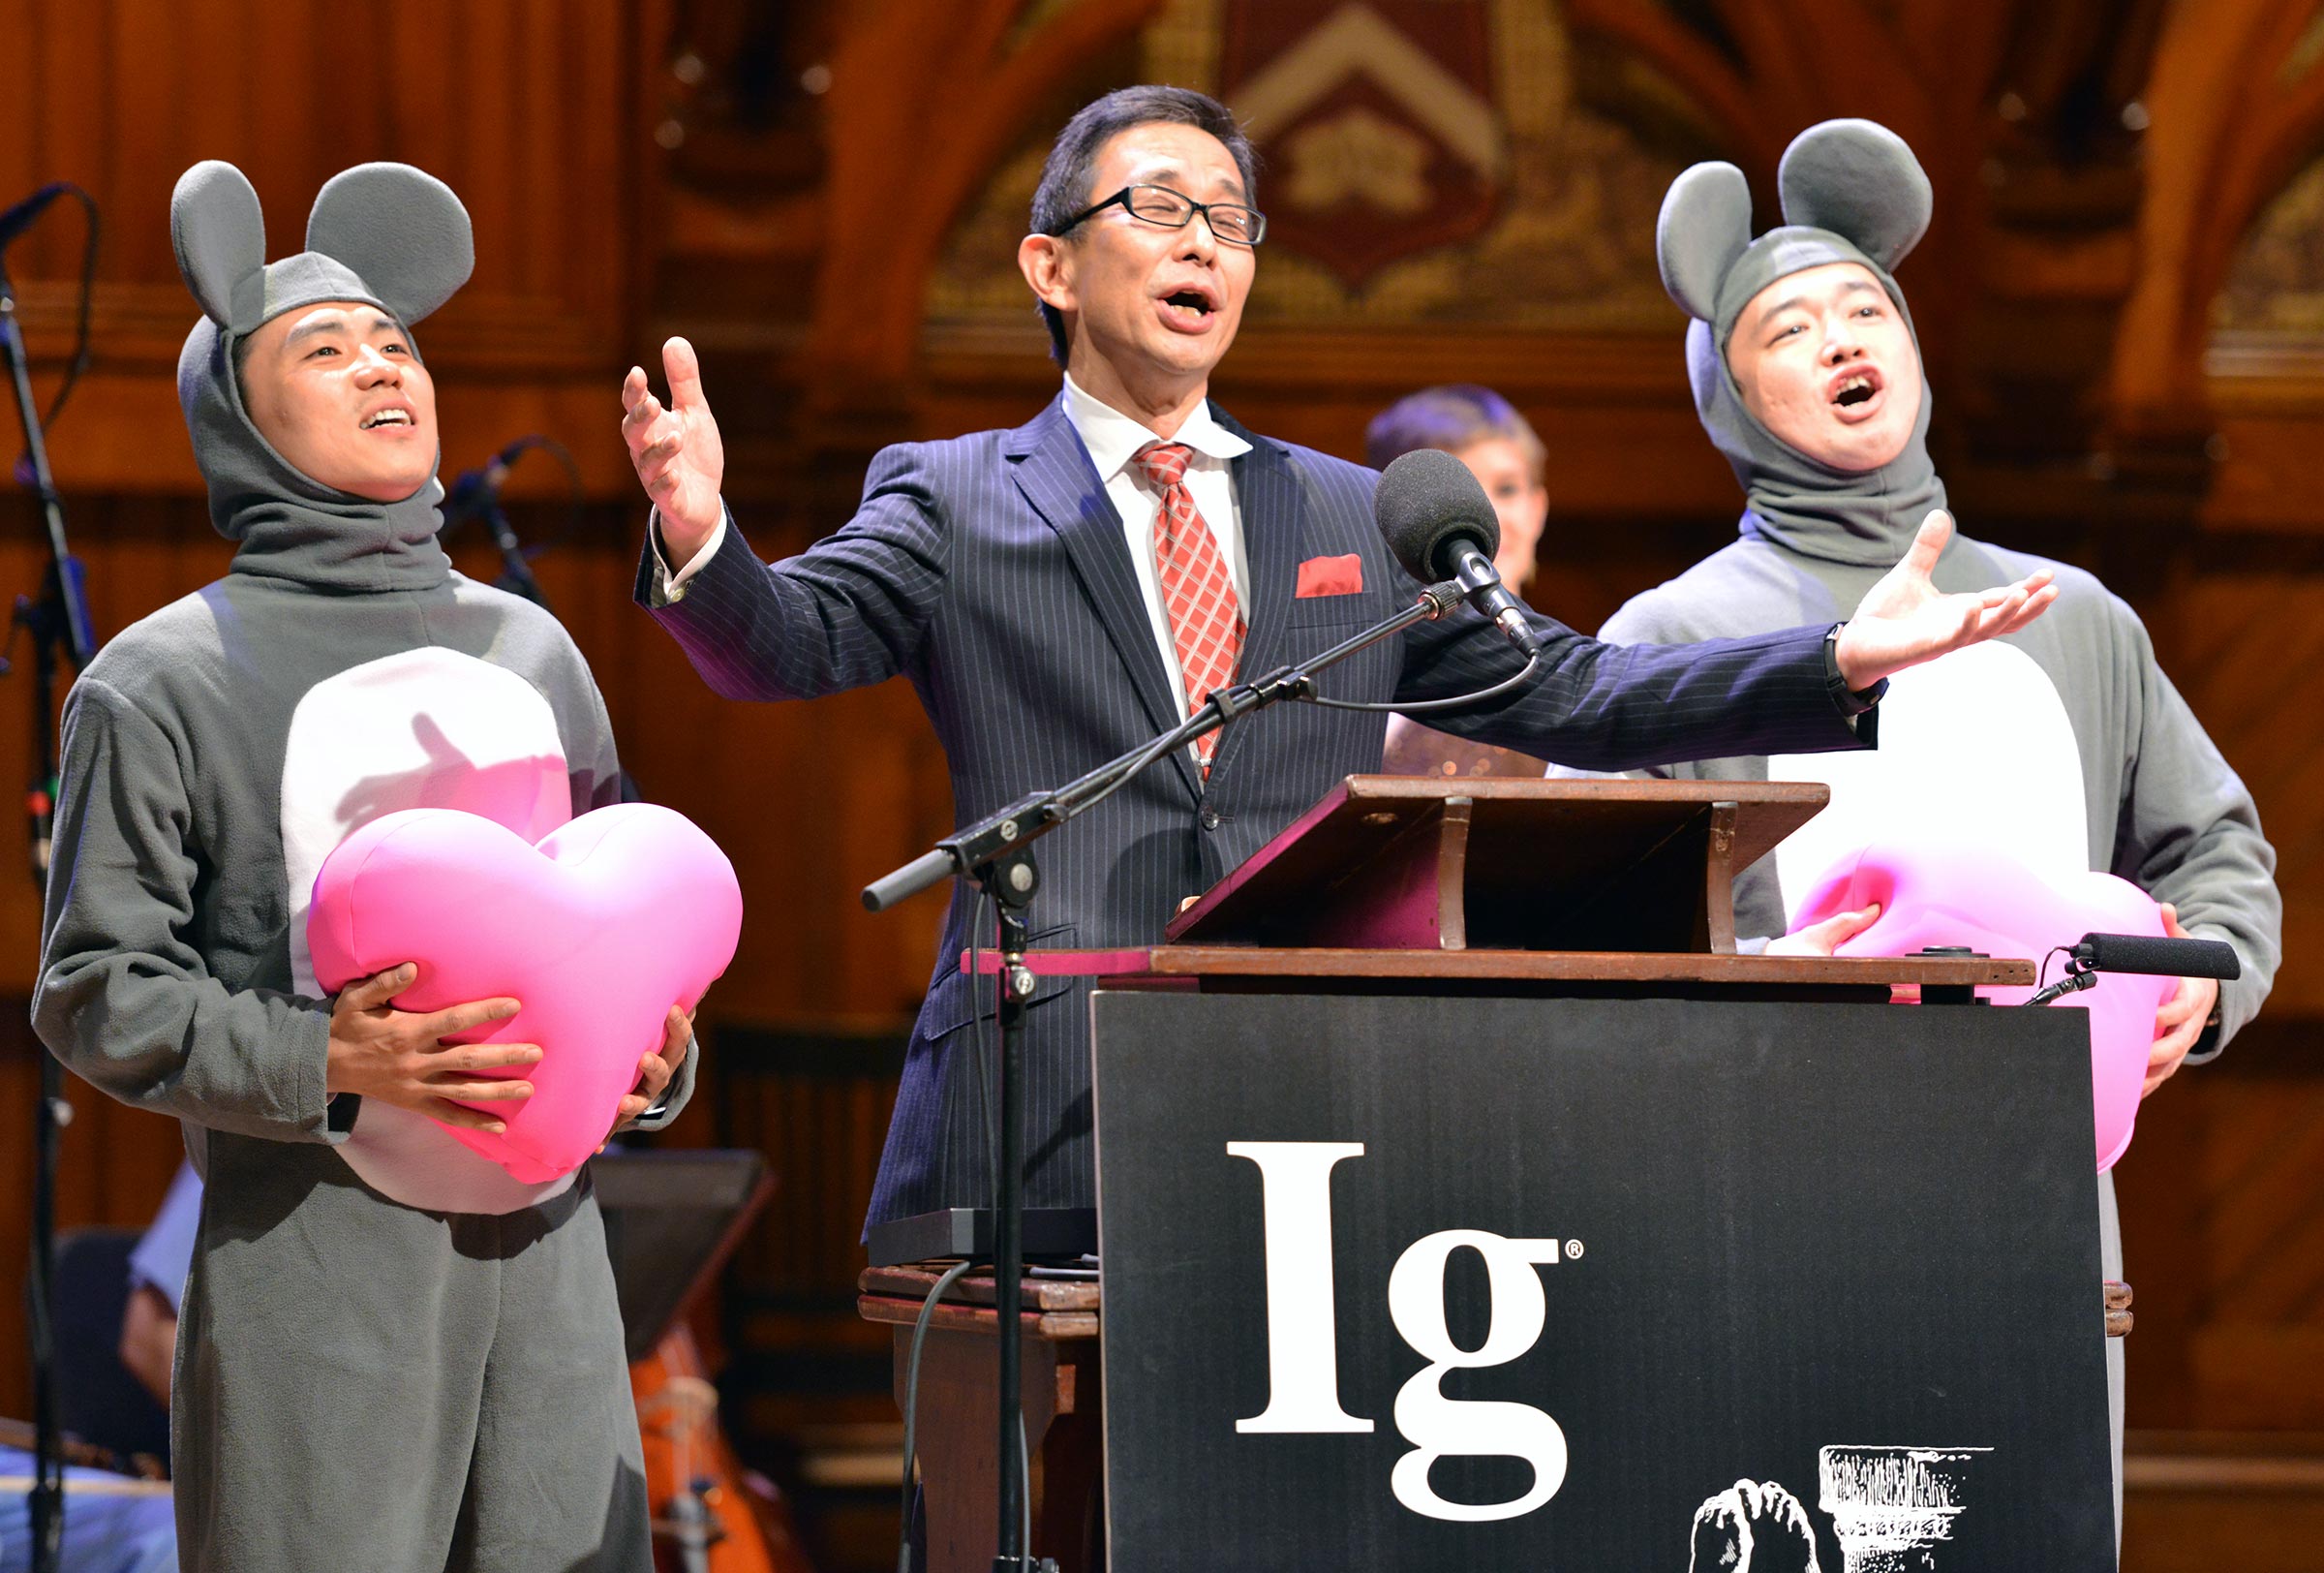 Ig pop: Masanori Niimi and colleagues regale attendees with opera at the Ig Nobel ceremony in Cambridge, Massachusetts, in September. | THE ANNALS OF IMPROBABLE RESEARCH